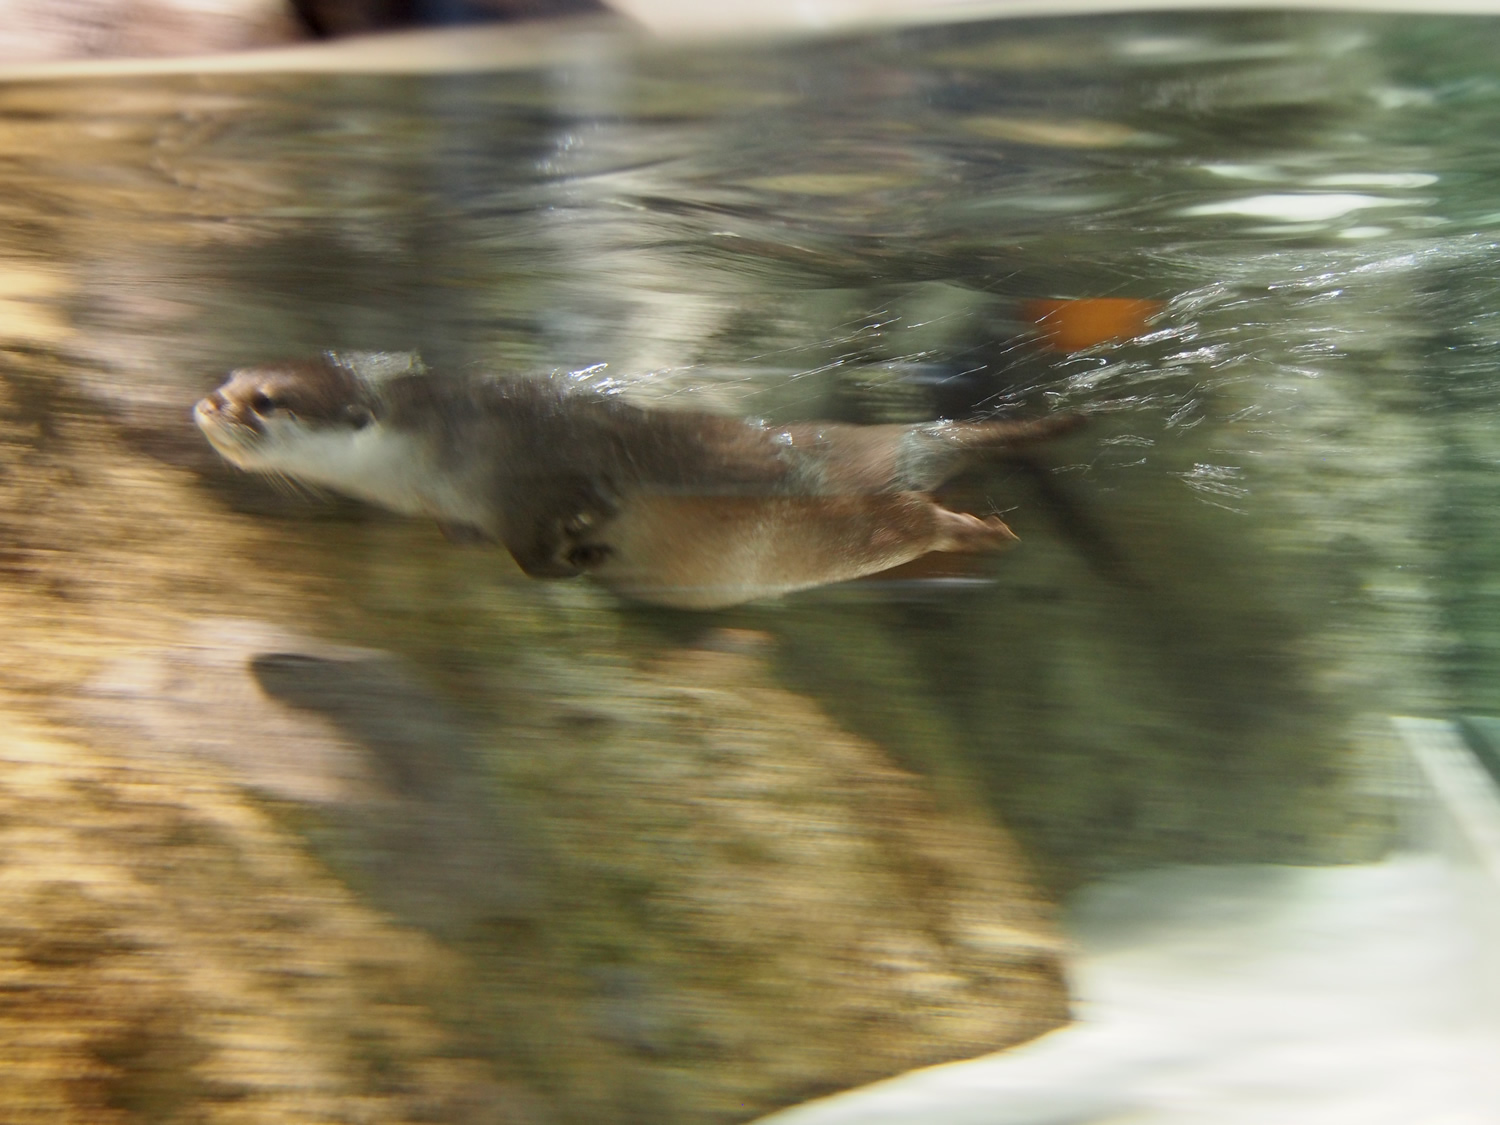 Watch Out: It's Another Otter Torpedo!